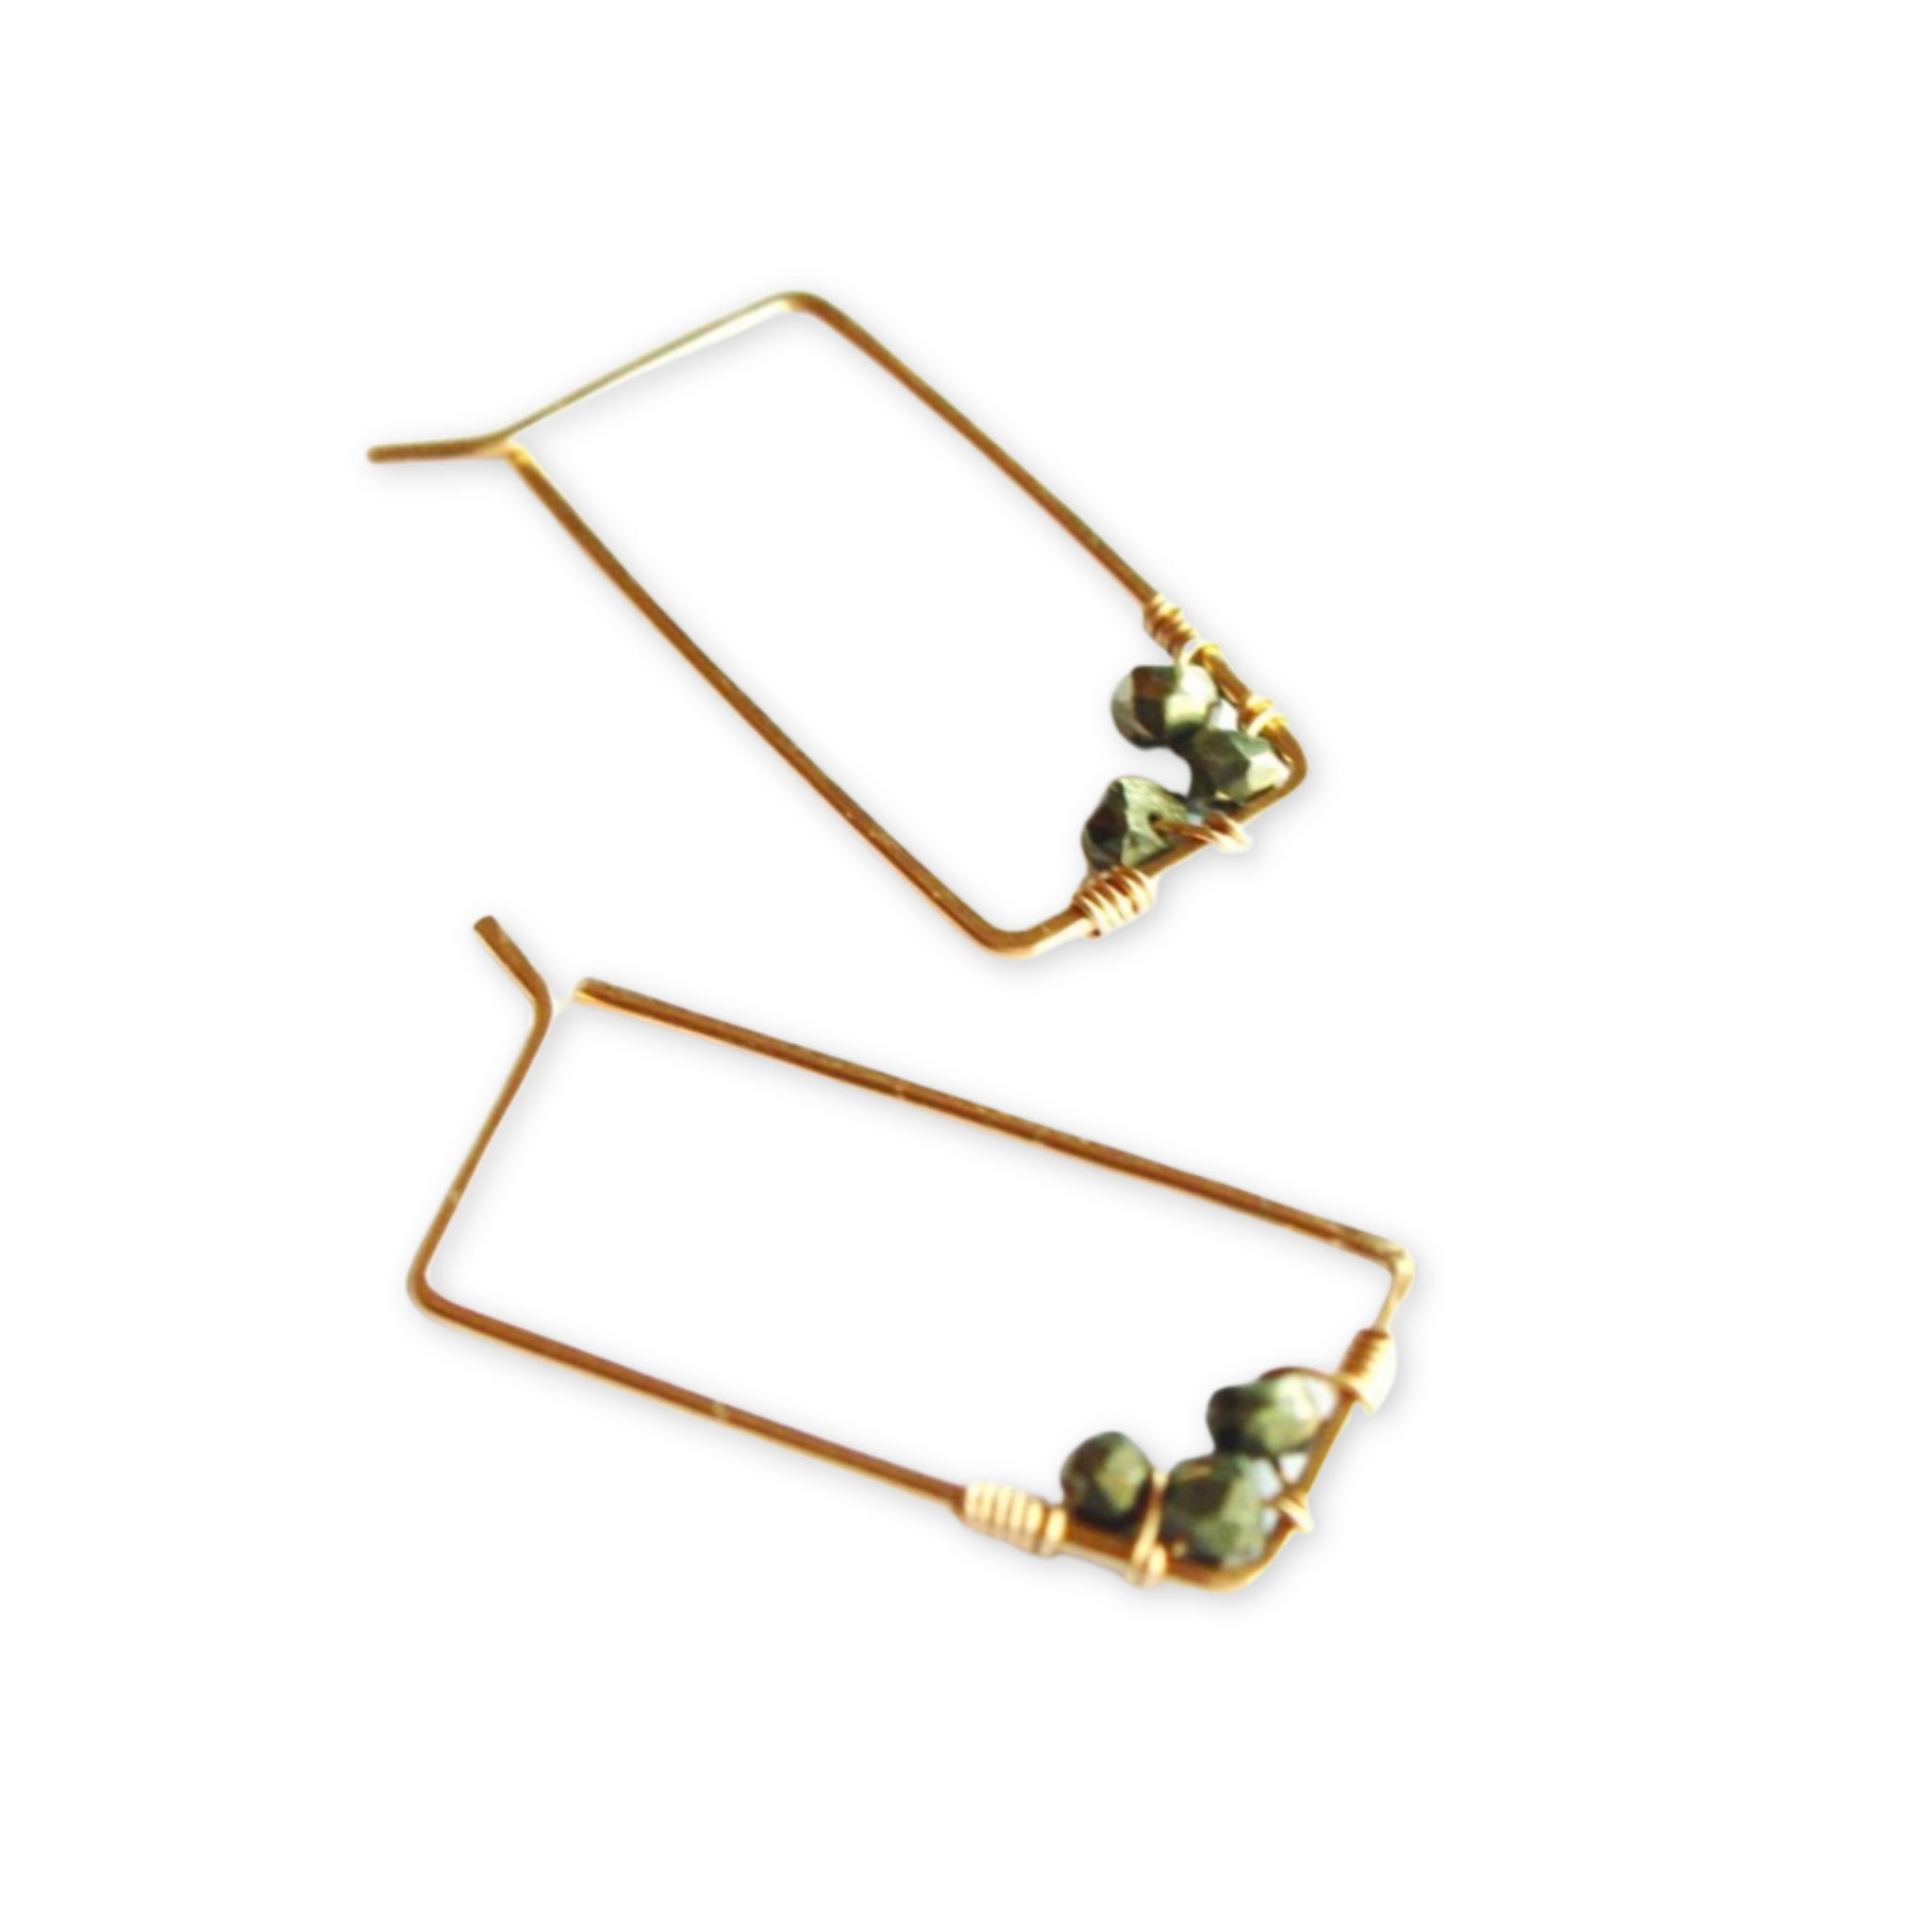 rectangular hoop earrings with three stones attached with wire